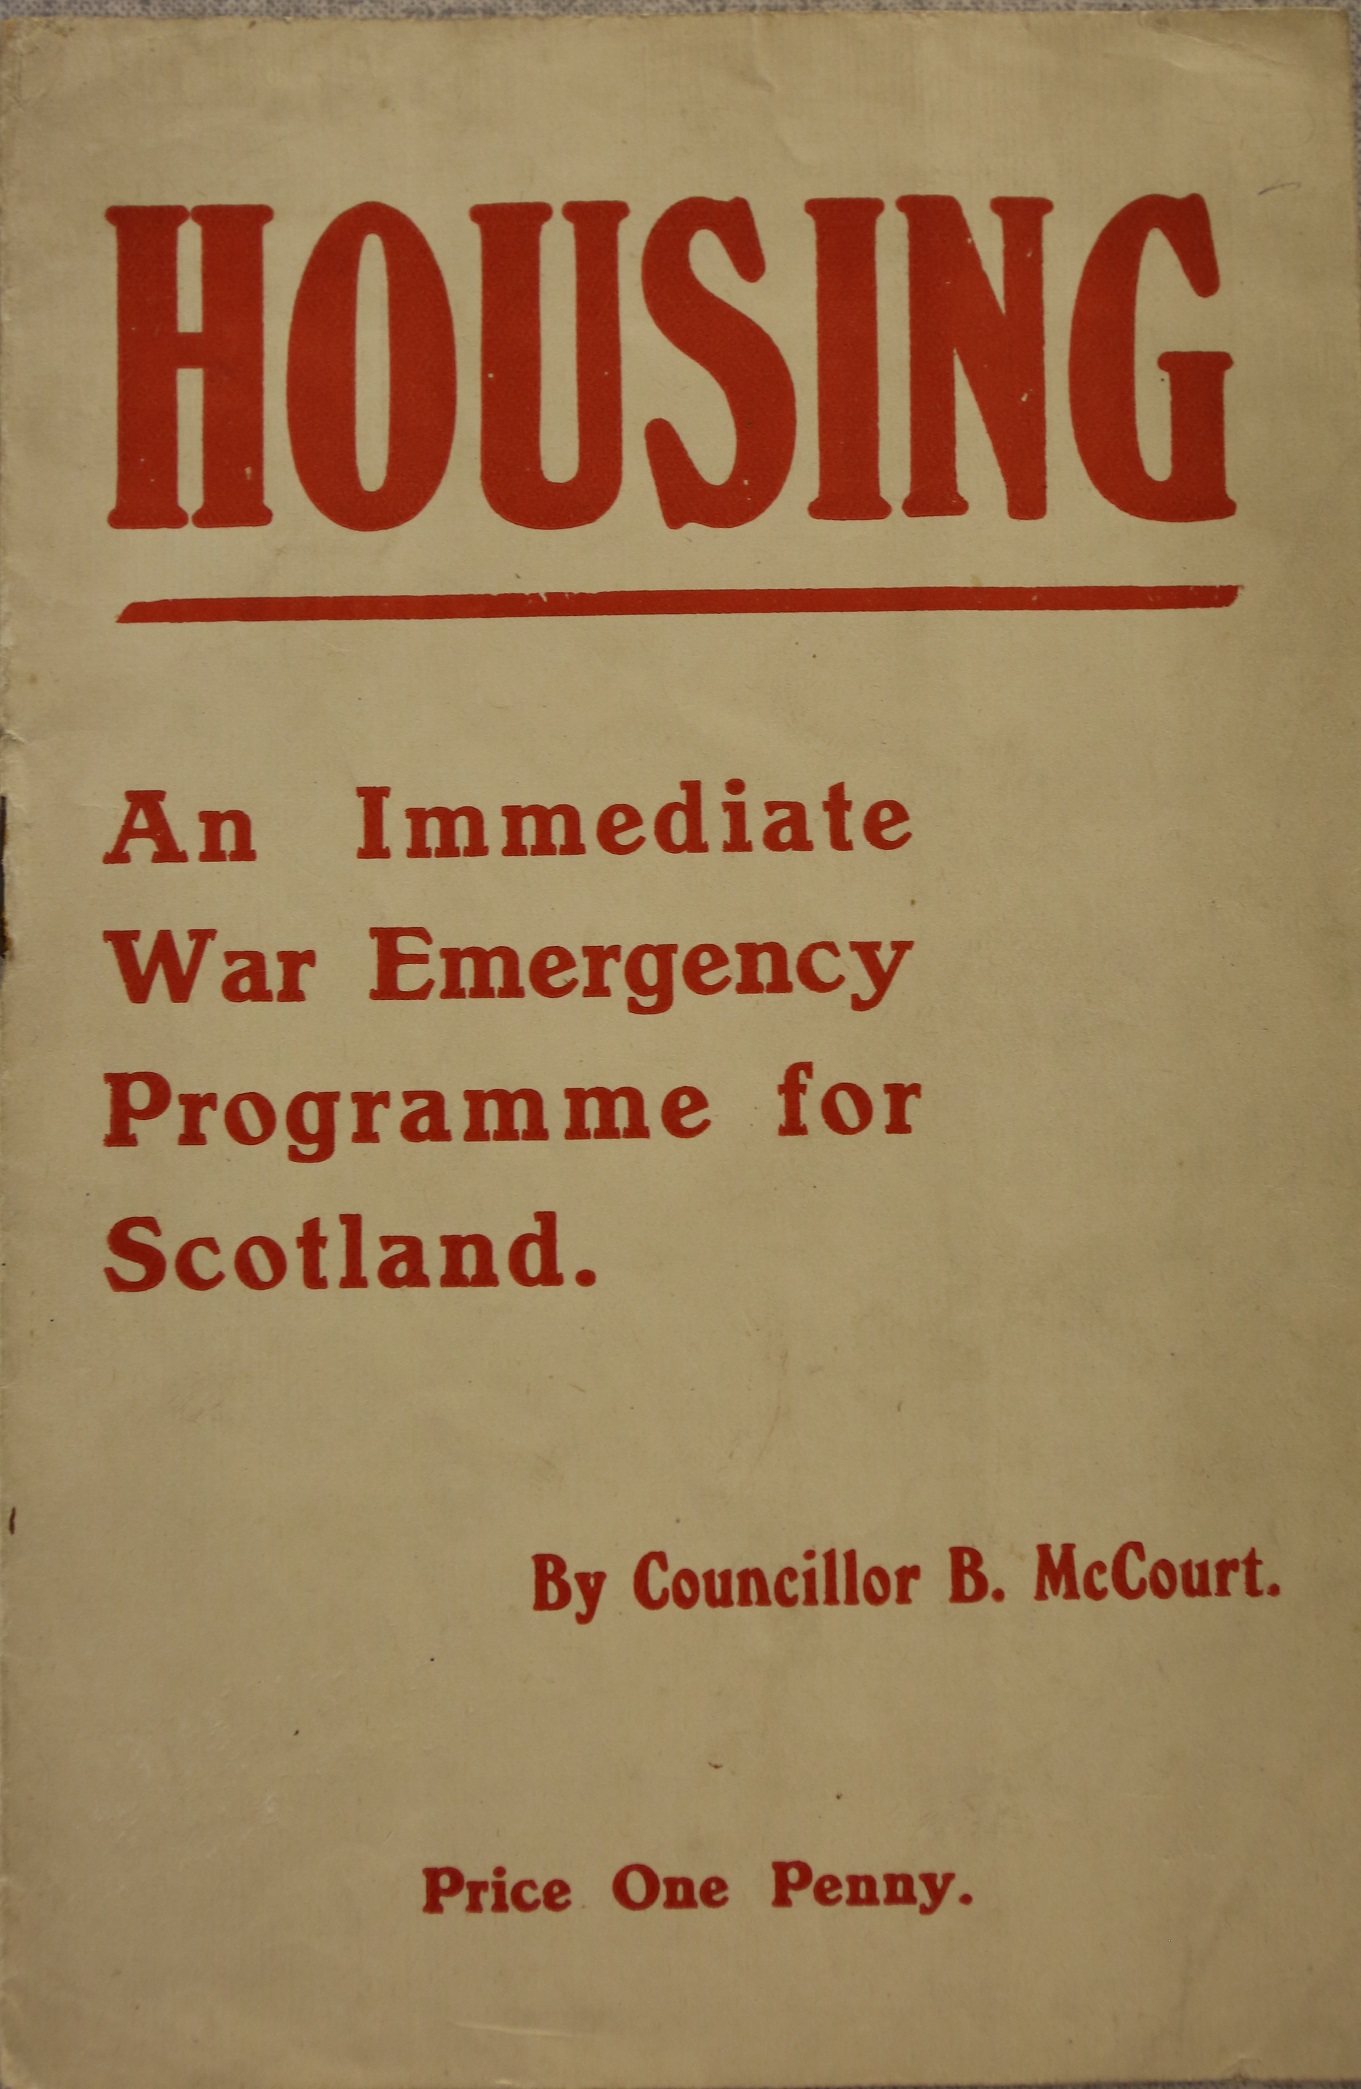 Housing: An Immediate War Emergency Programme for Scotland. By Councillor B. McCourt. Price One Penny